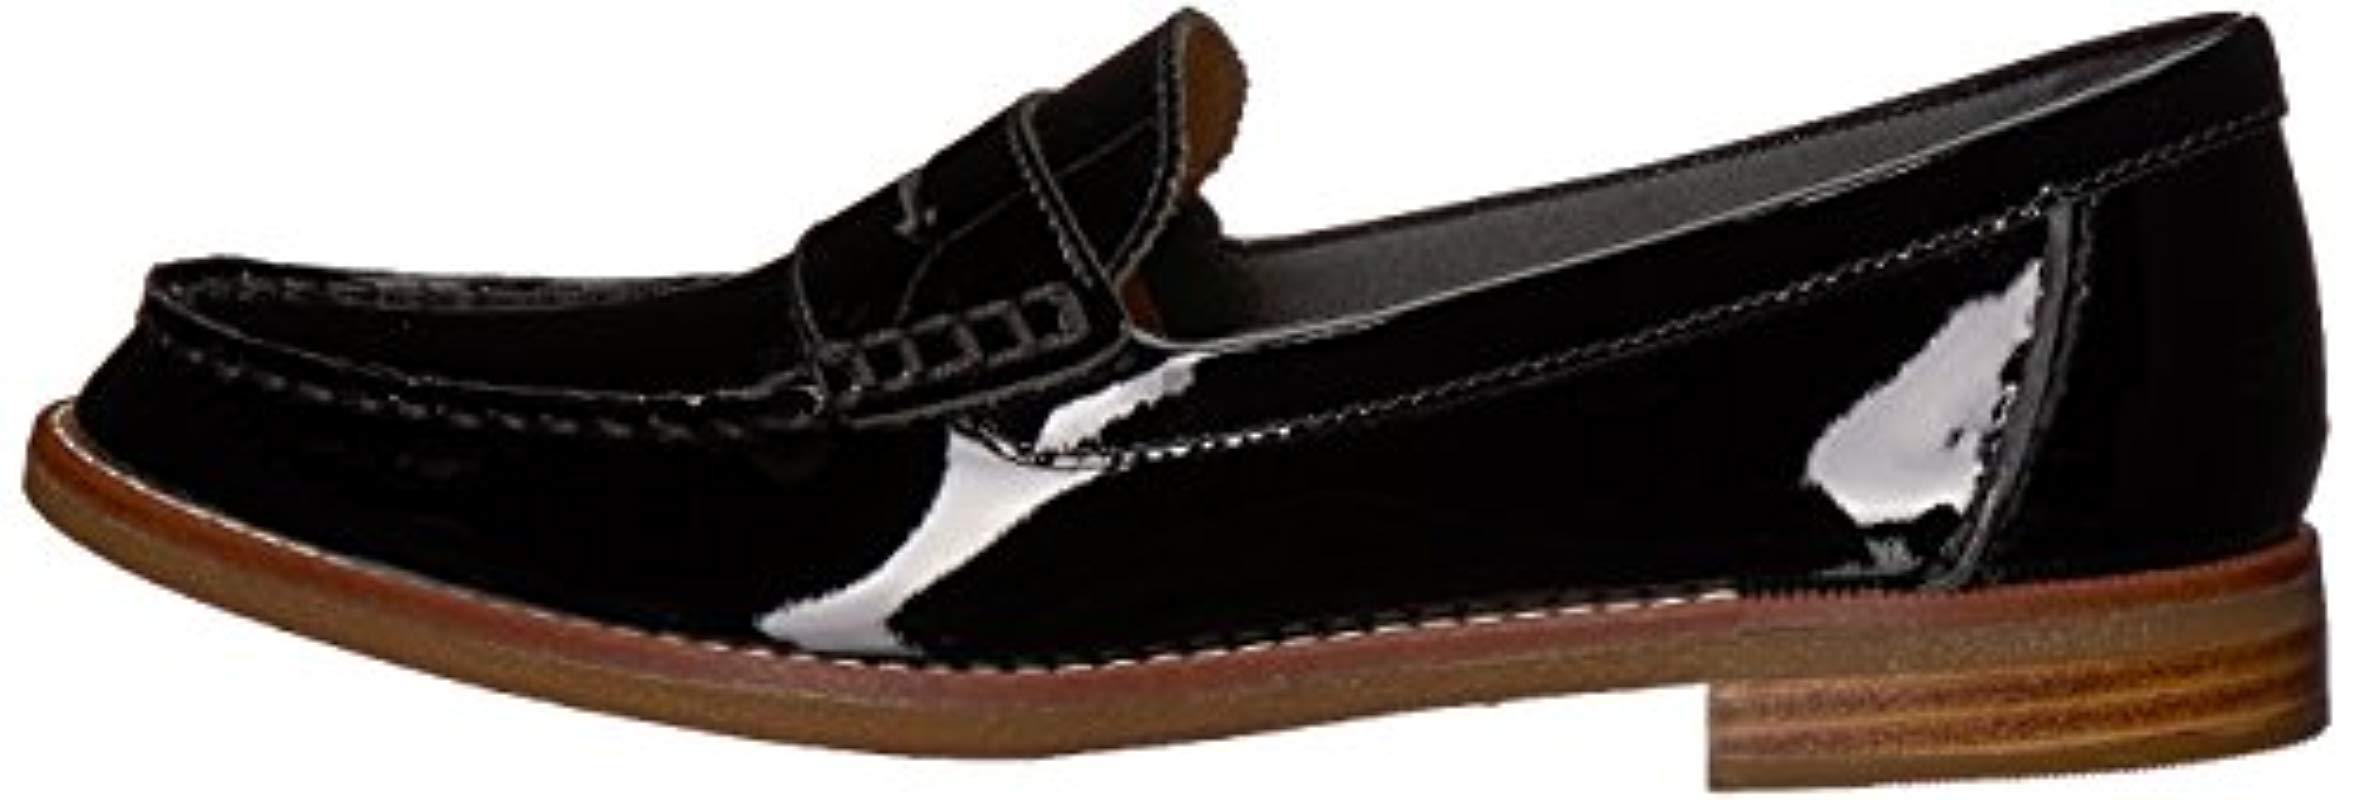 Sperry Top-Sider Leather Seaport Penny Loafer in Black Patent (Black) -  Save 51% | Lyst